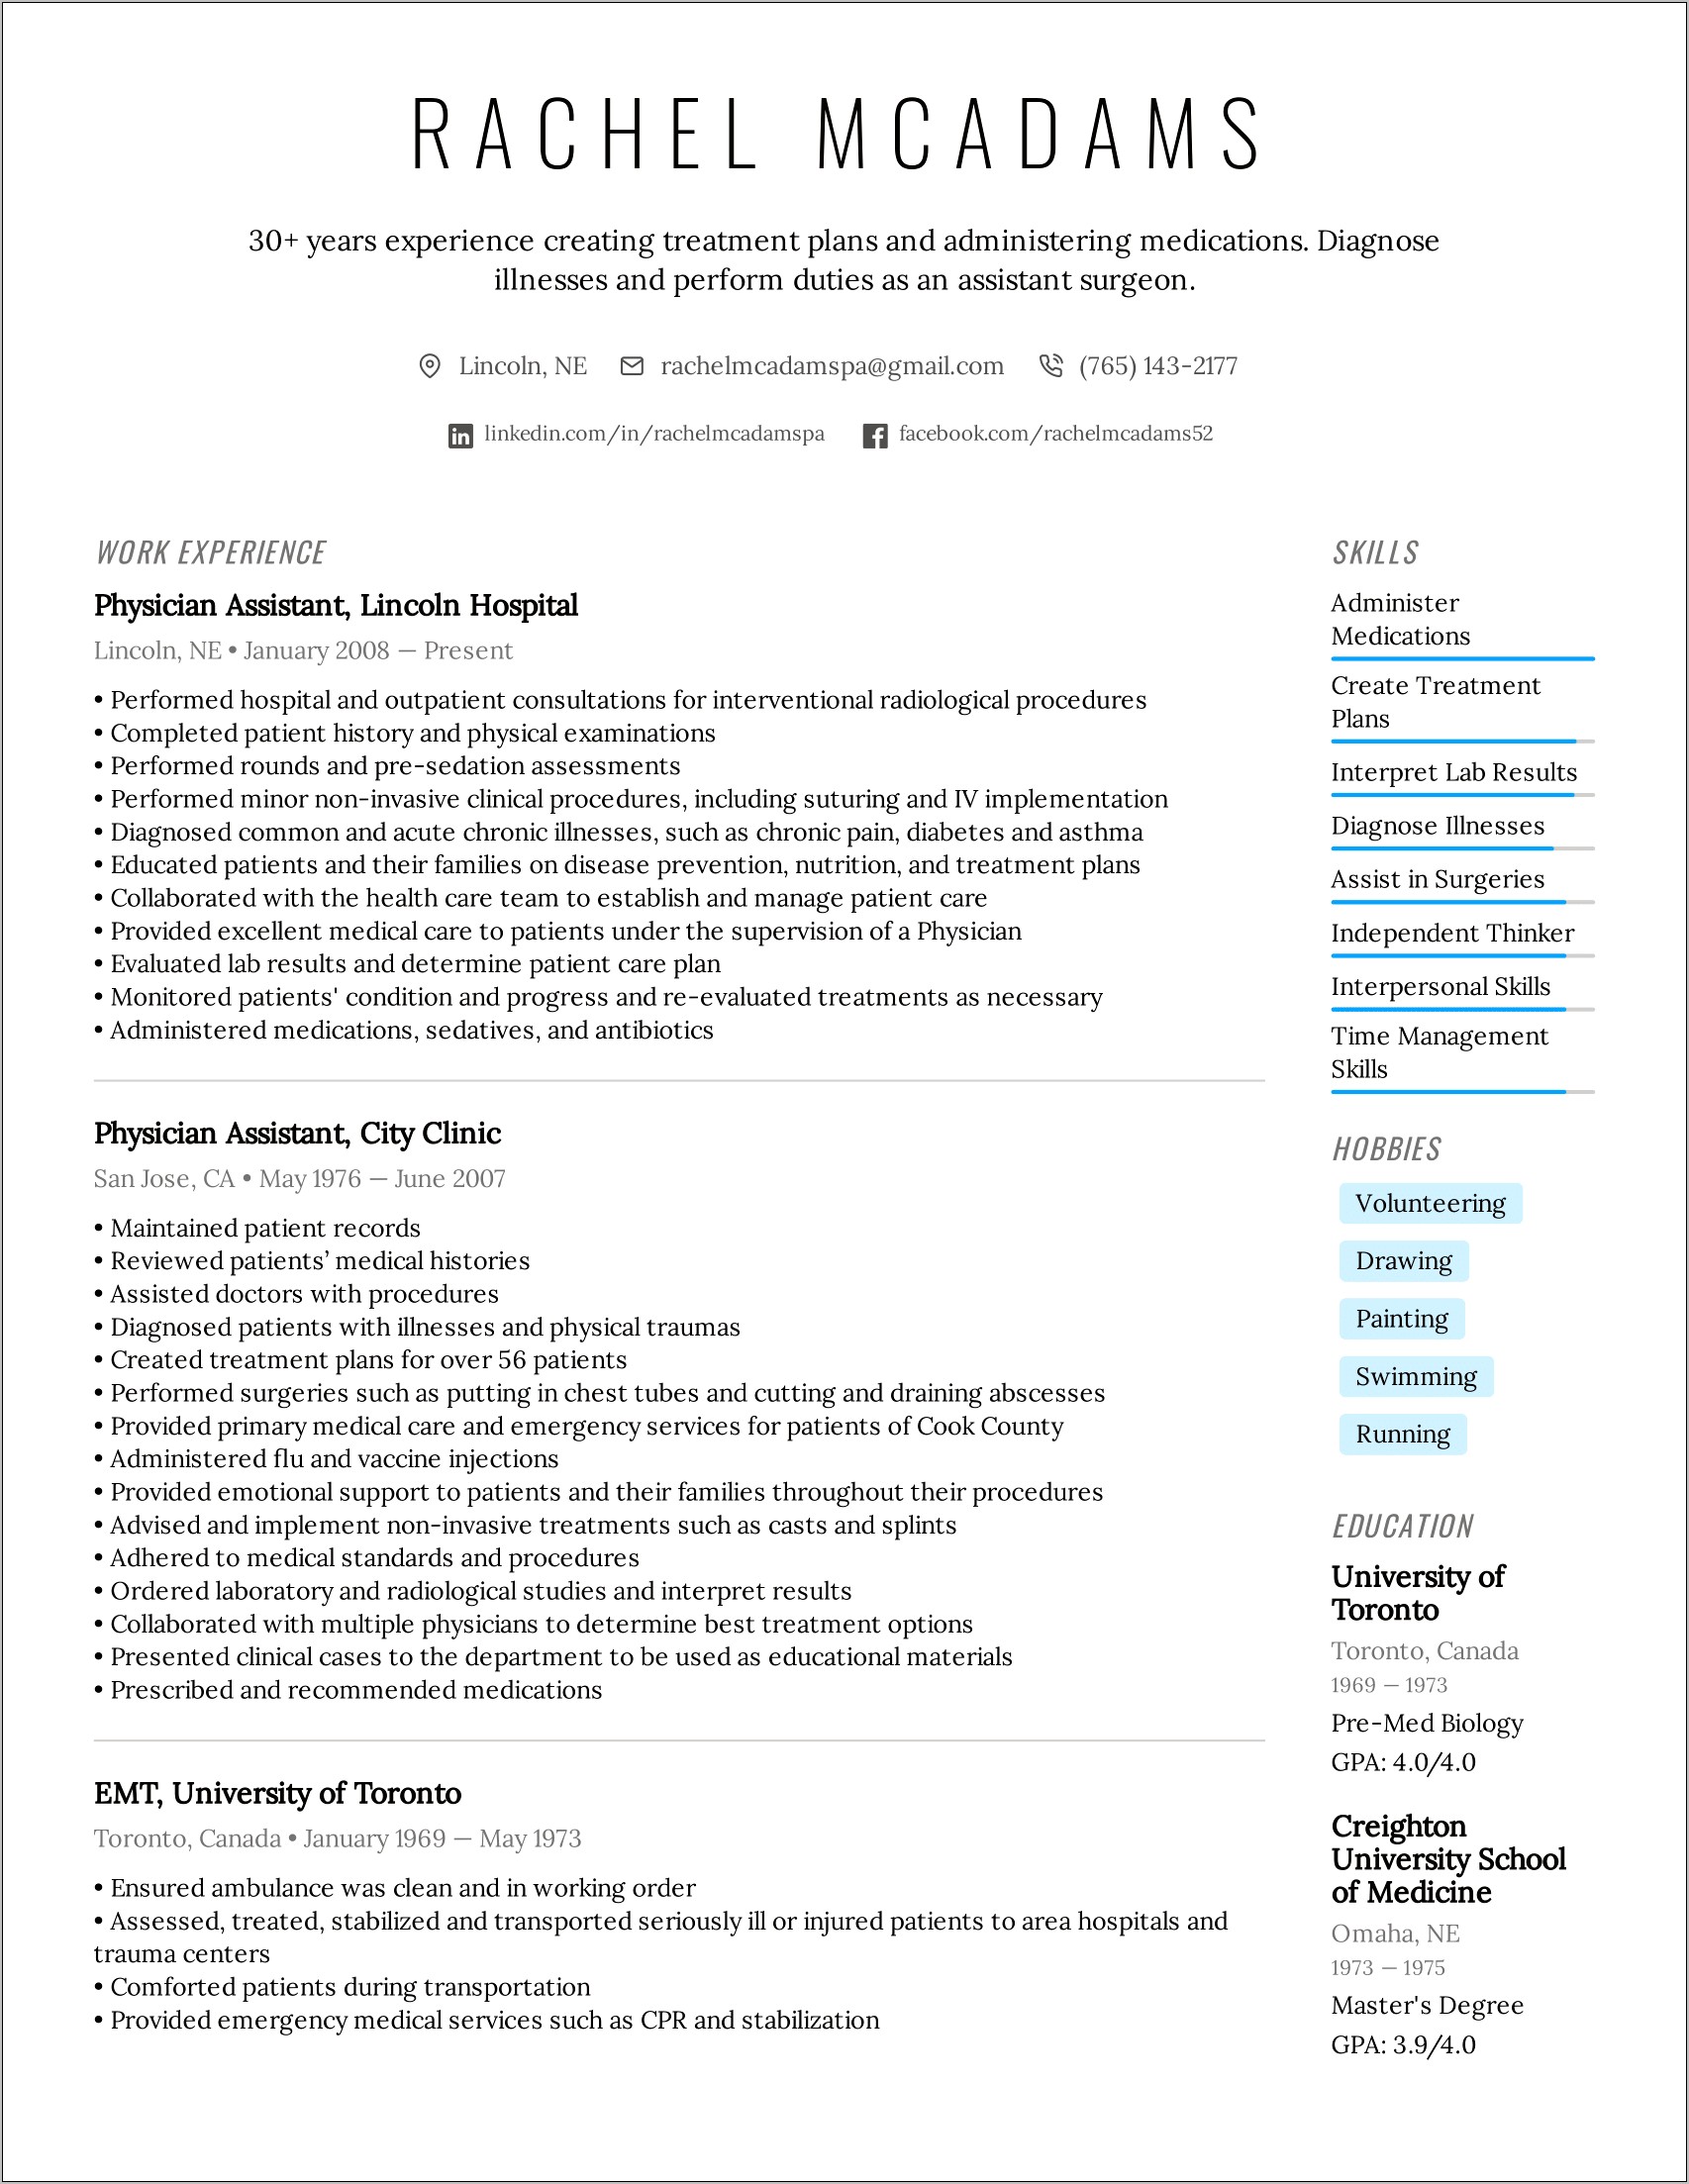 Sample Of Resume With Education Batchelors Degree